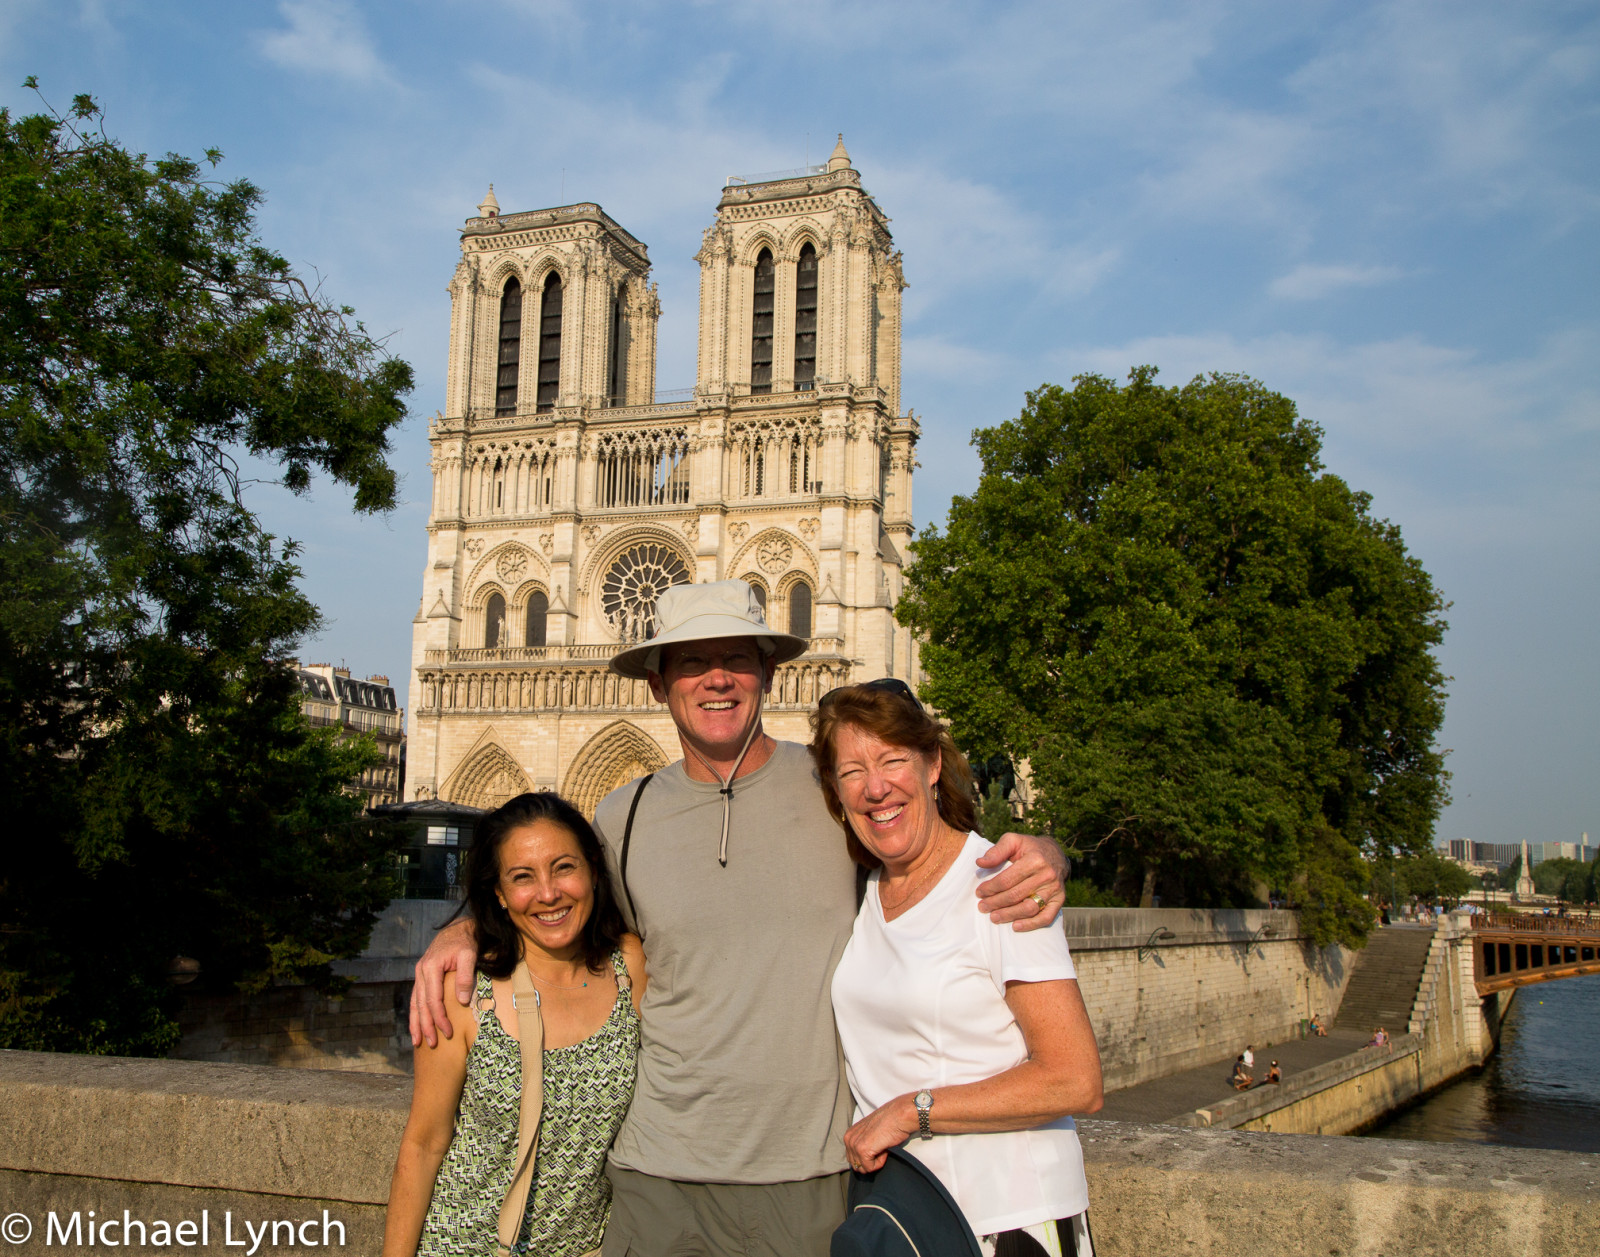 Veronica, Phil, and Sharon in front of Notre Dame